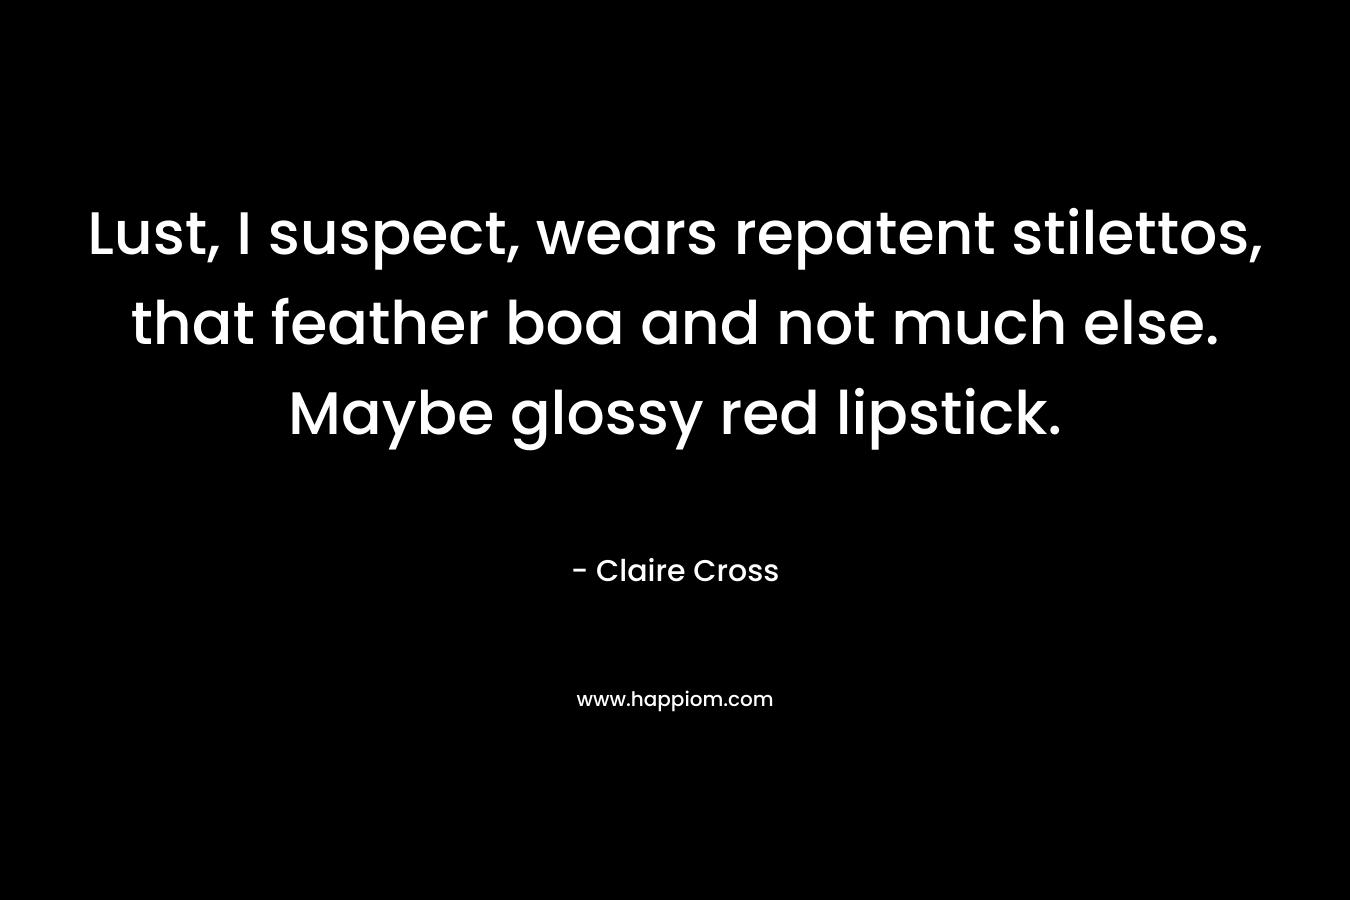 Lust, I suspect, wears repatent stilettos, that feather boa and not much else. Maybe glossy red lipstick. – Claire Cross